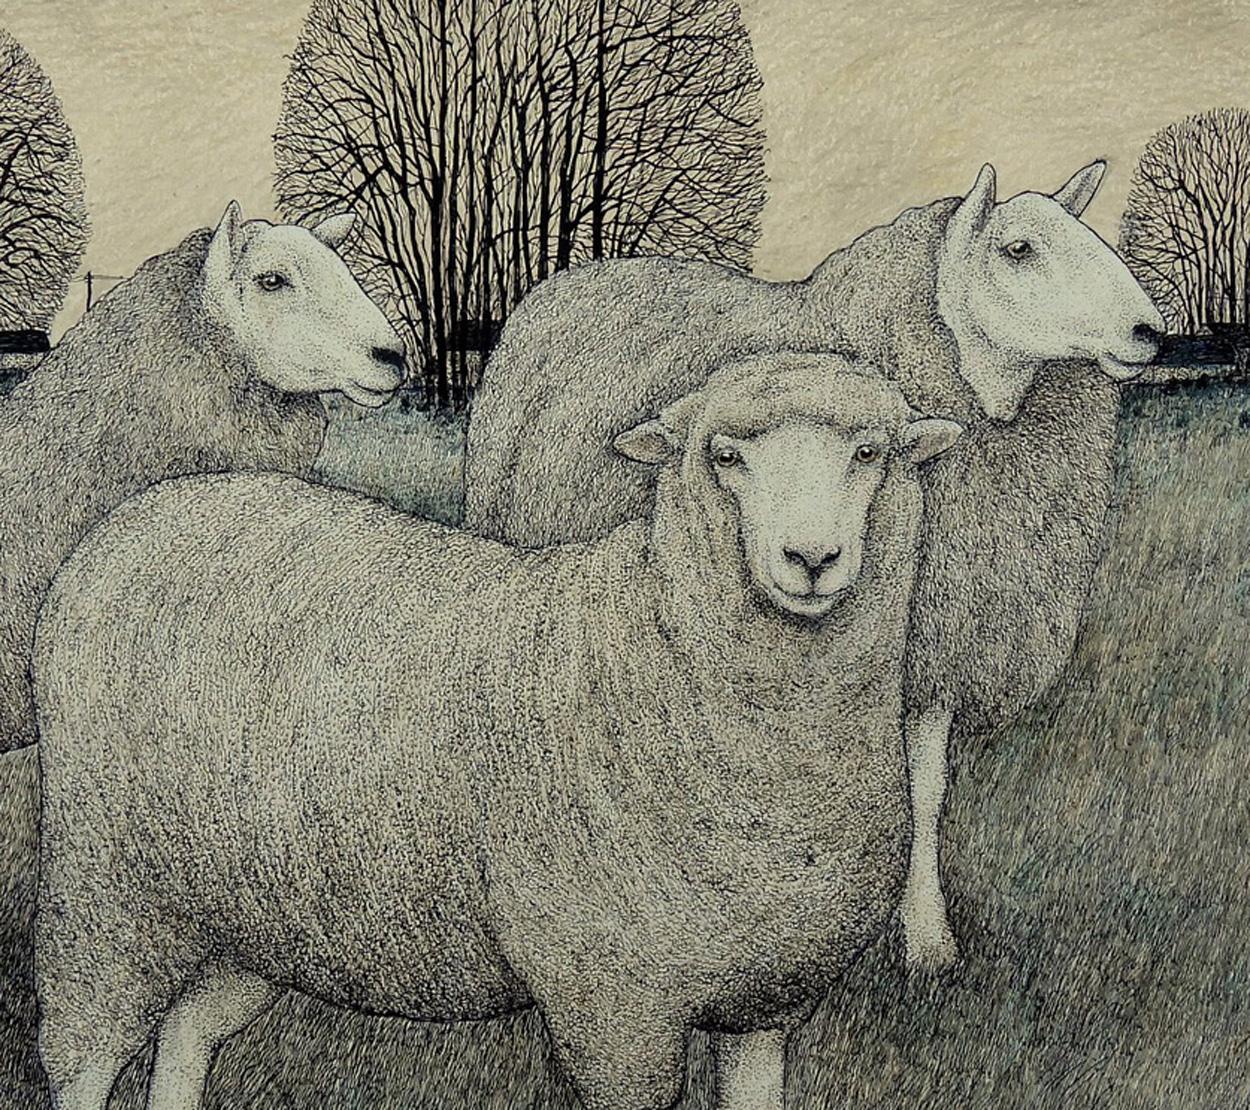 British Seren Bell, 'Welsh', Mixed Media on Paper, Flock by the Tree Clumps For Sale